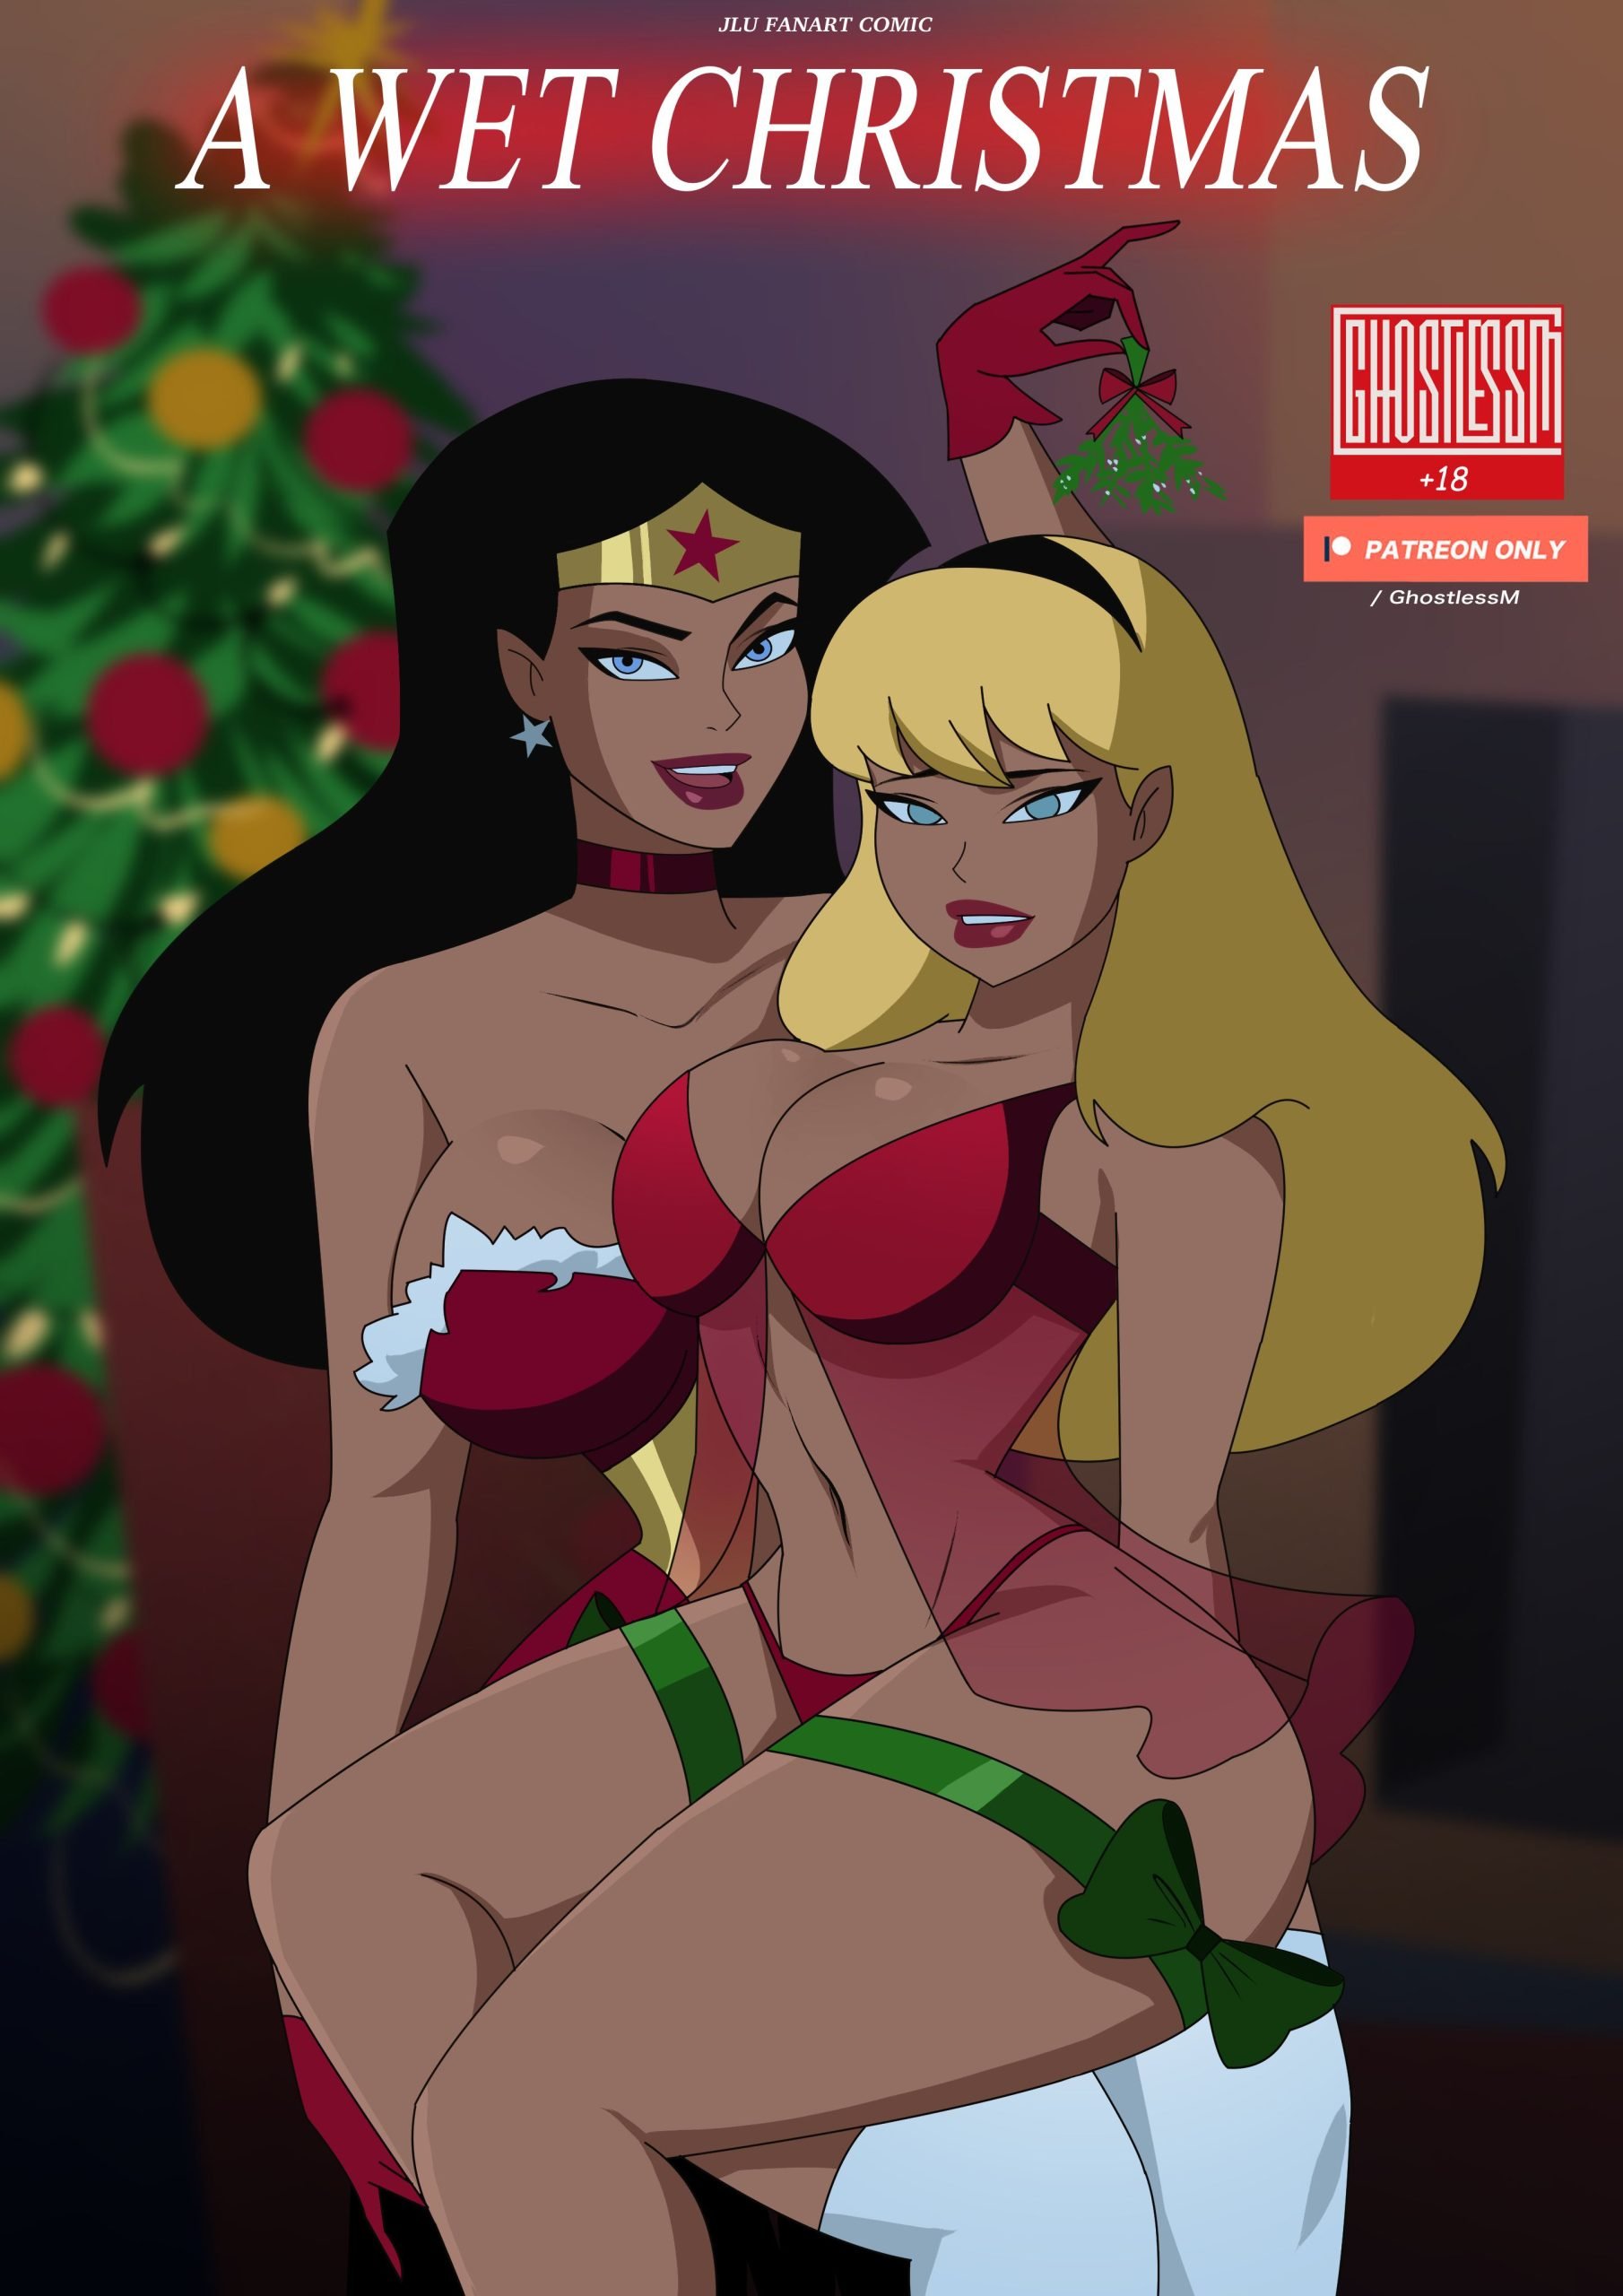 A Wet Christmas (Justice League) GhostlessM Porn Comic